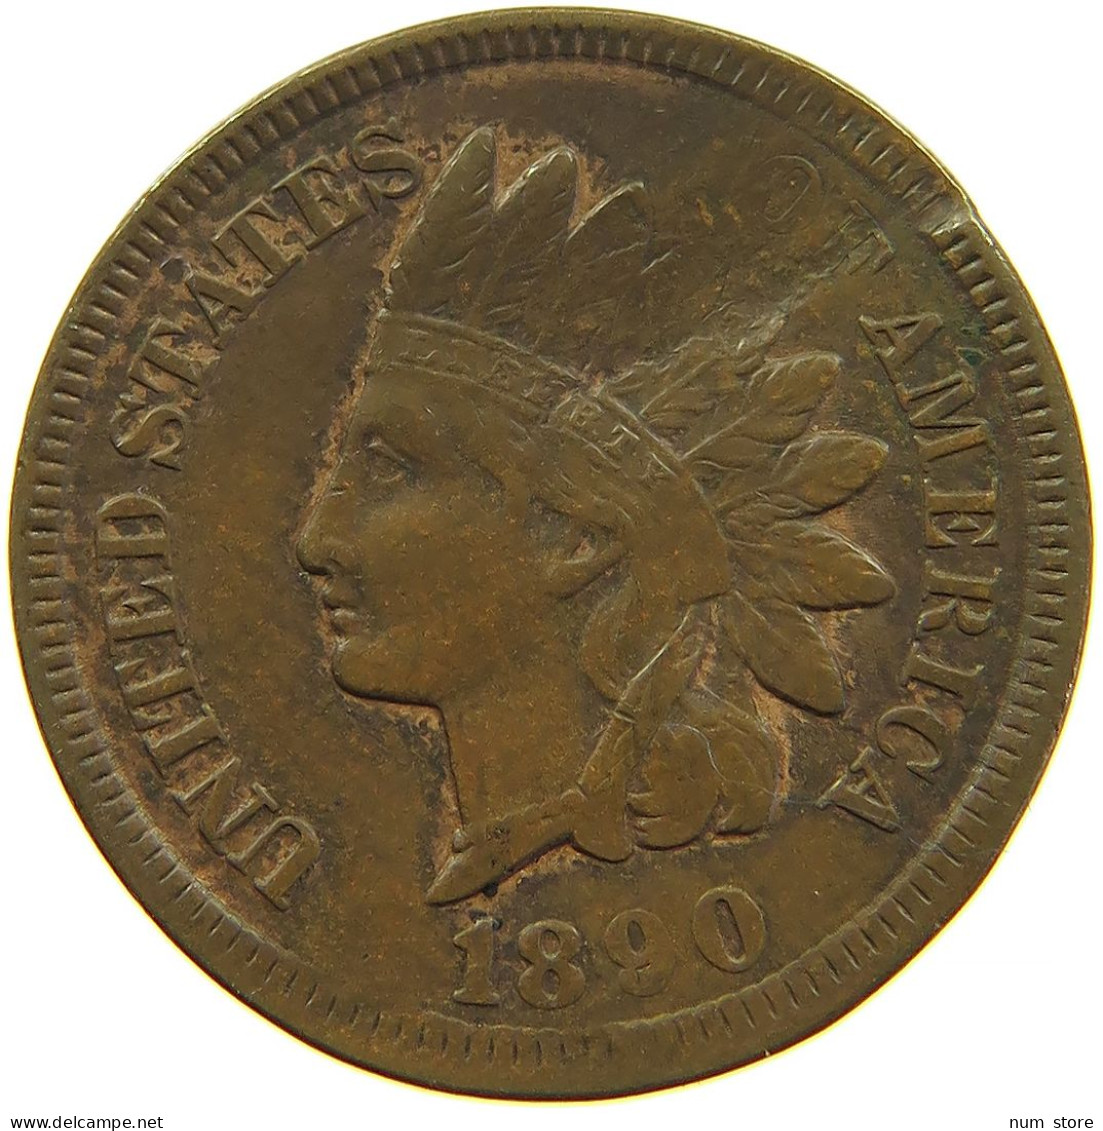 UNITED STATES OF AMERICA CENT 1890 INDIAN HEAD #s091 0393 - 1859-1909: Indian Head